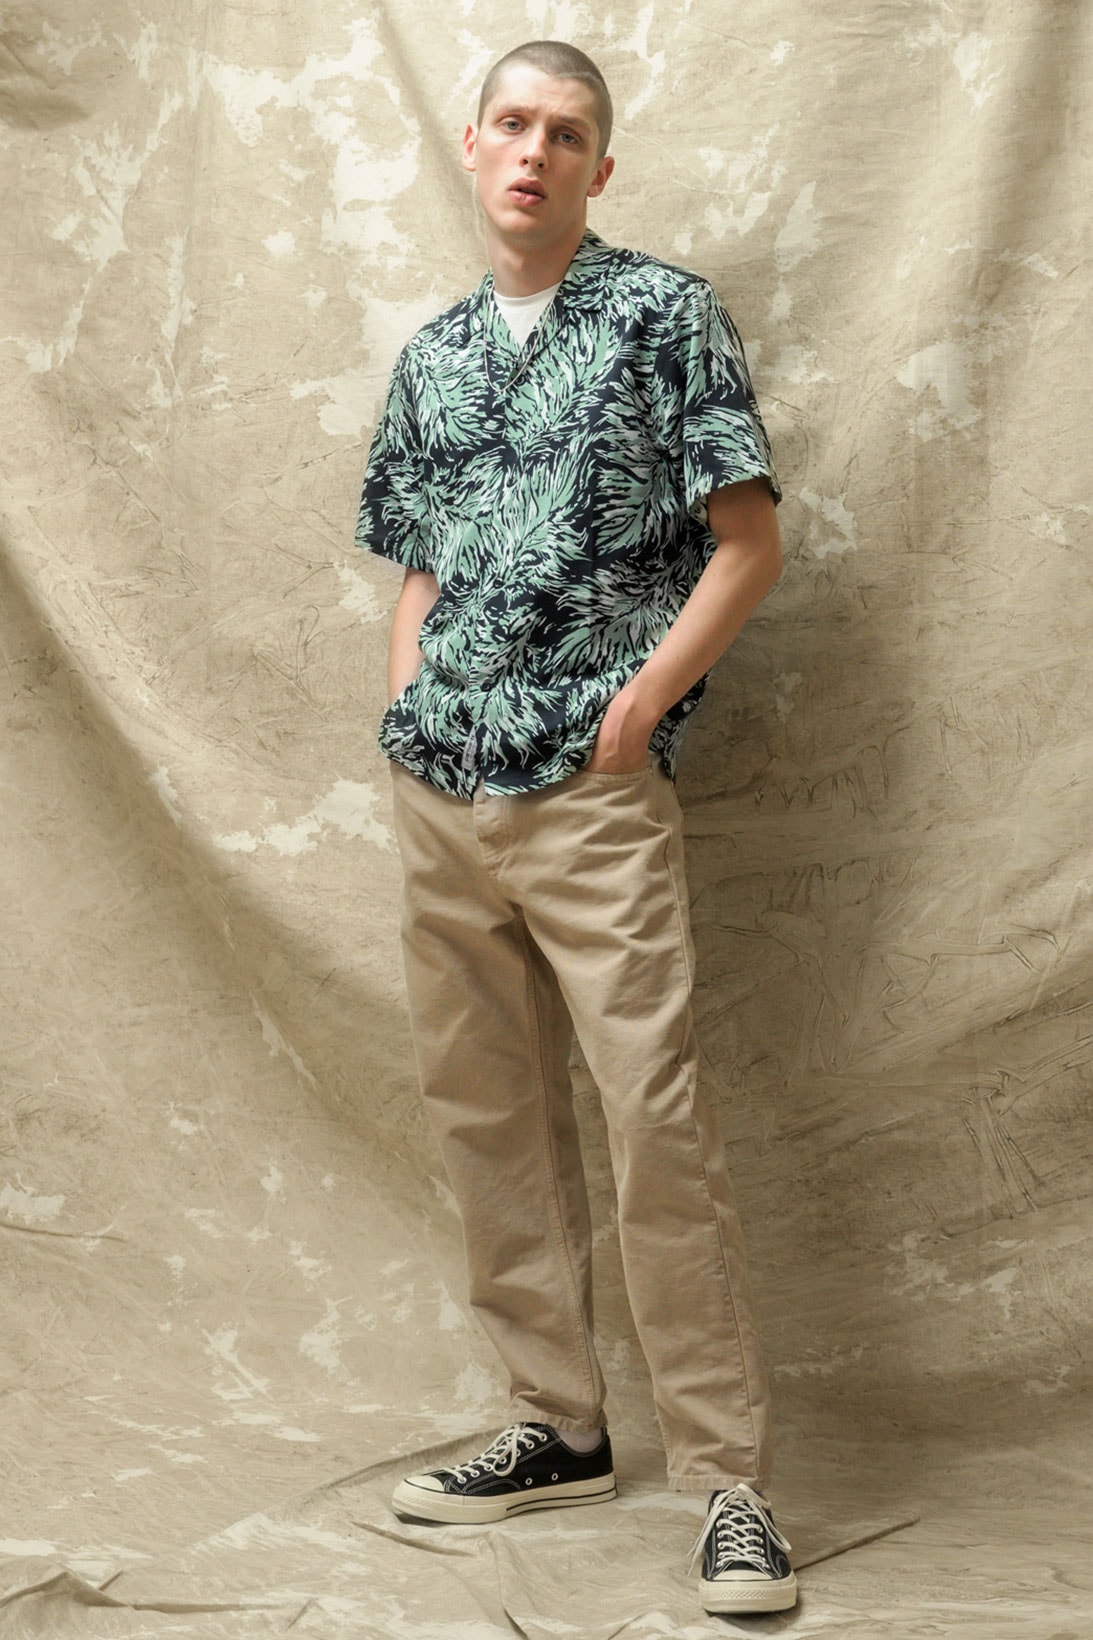 carhartt wip spring summer 2021 ss21 collection lookbook pattern shirt trousers